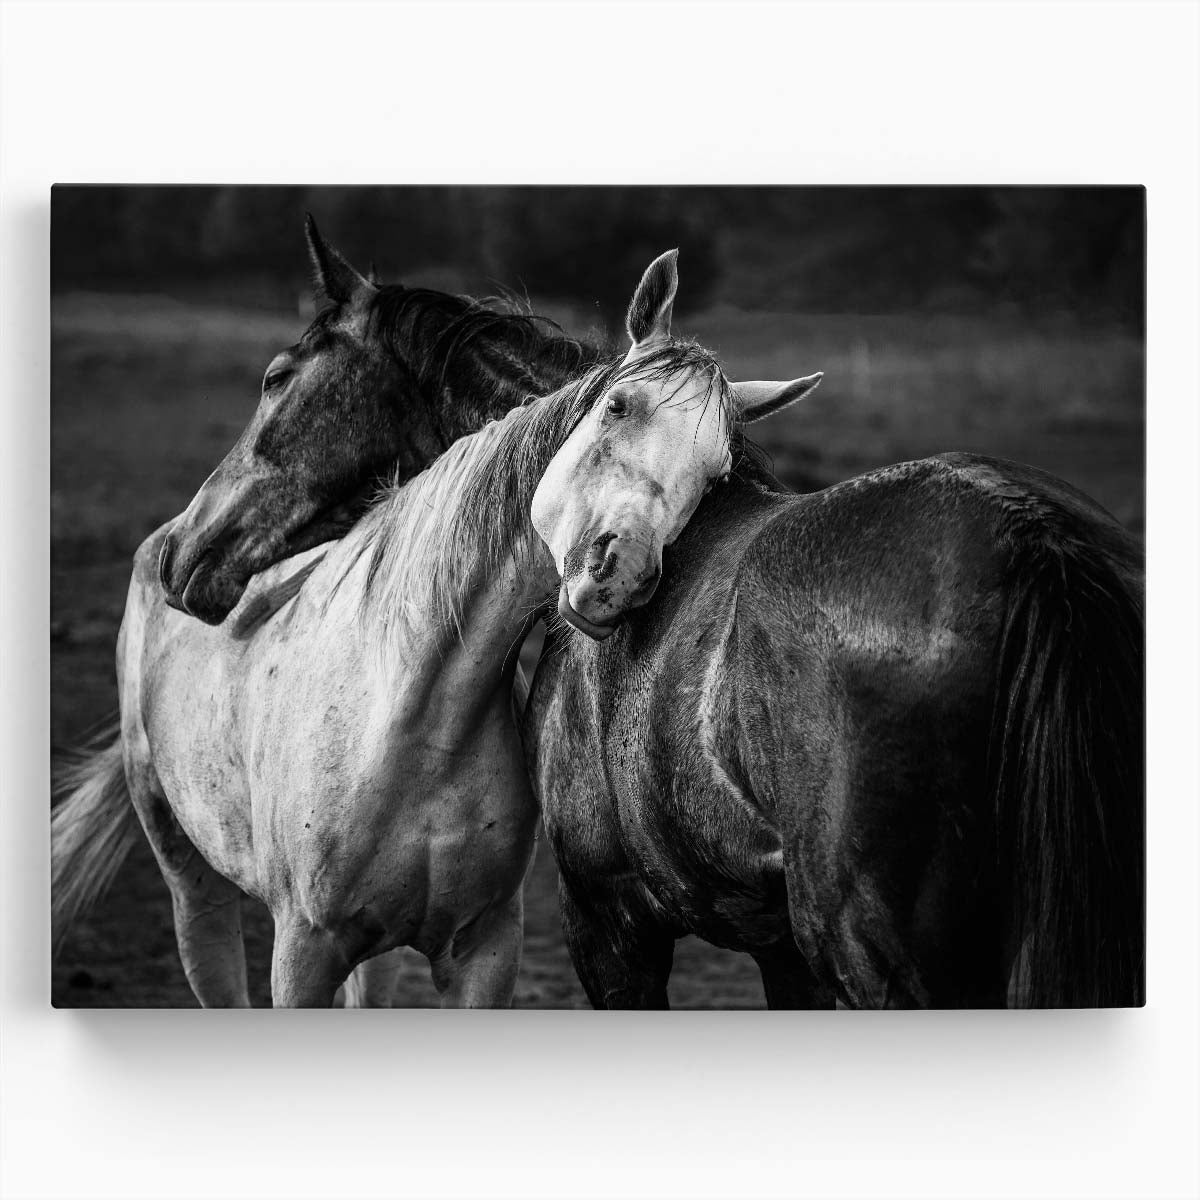 Embracing Horses in Rain Monochrome Equestrian Love Photography Wall Art by Luxuriance Designs. Made in USA.